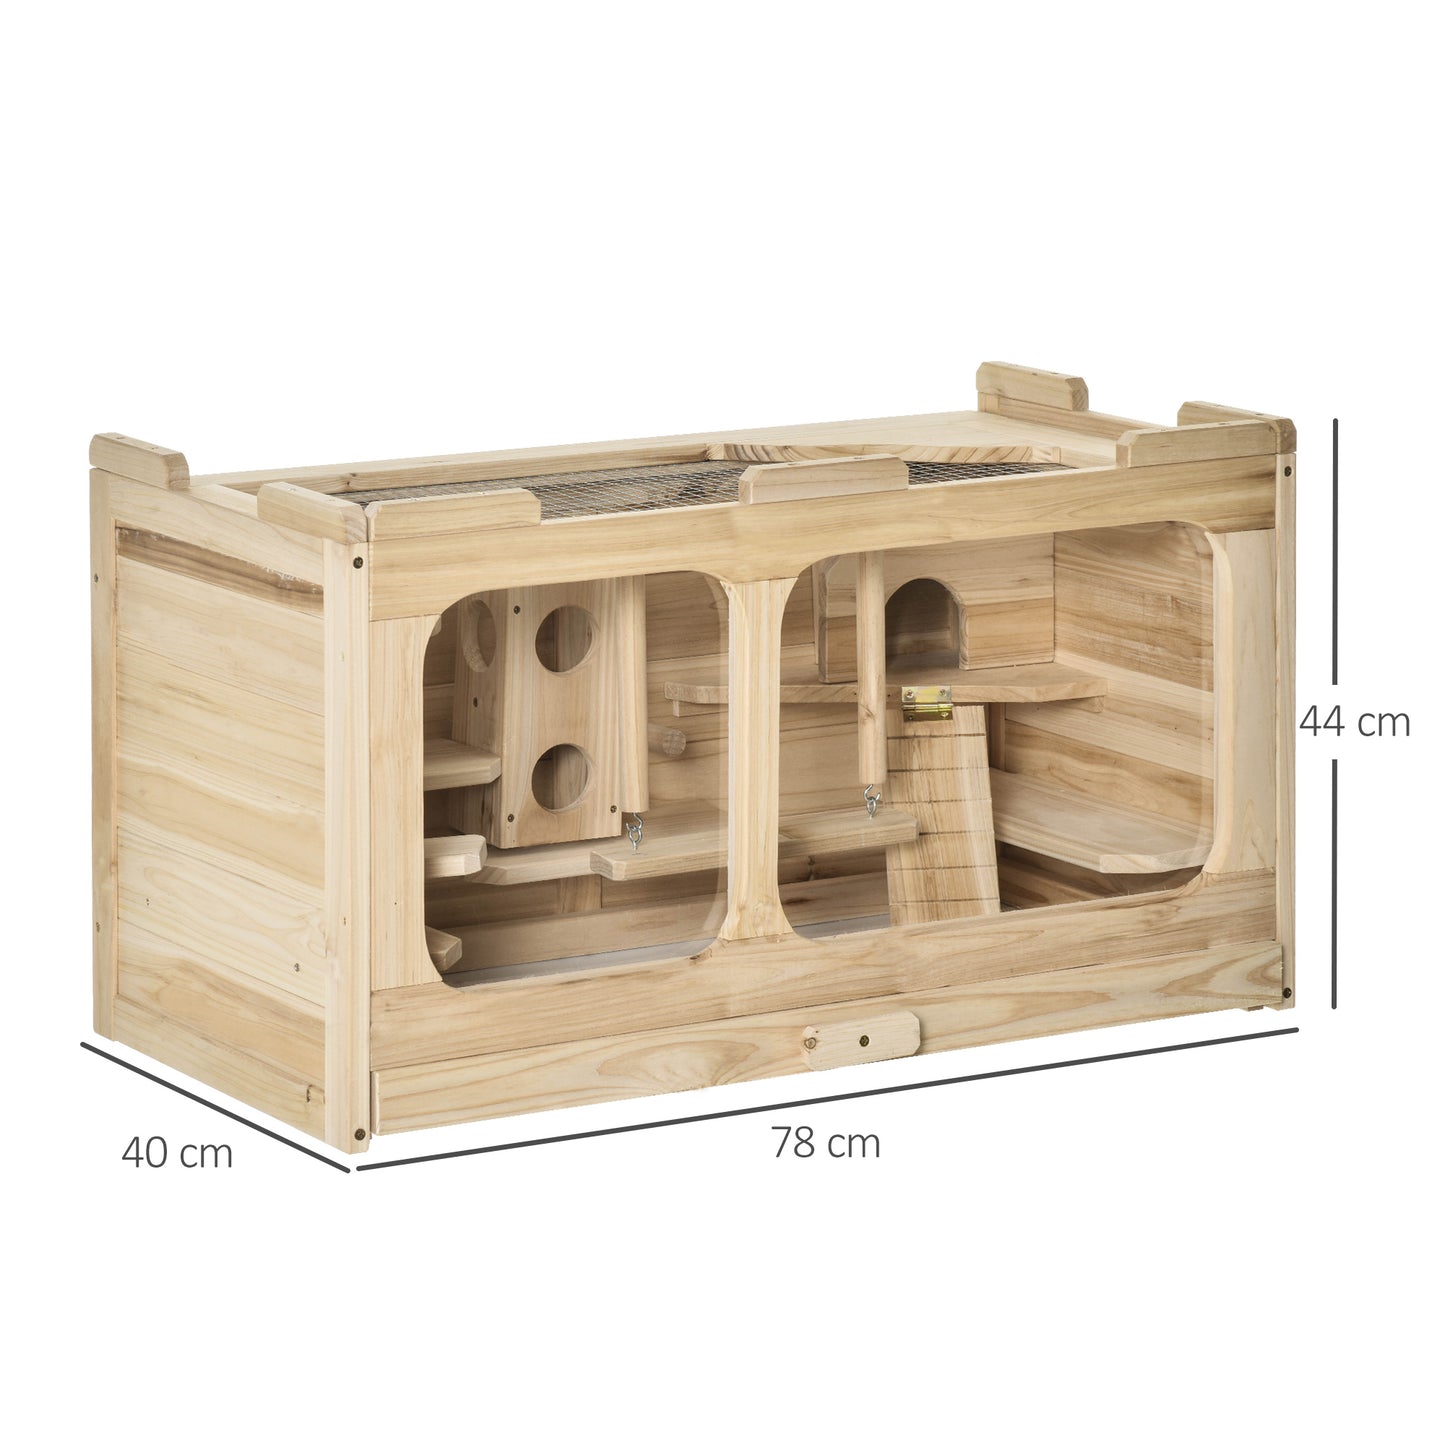 PawHut Wooden Hamster Cage Rodent Small Animal Kit Play House for Indoor